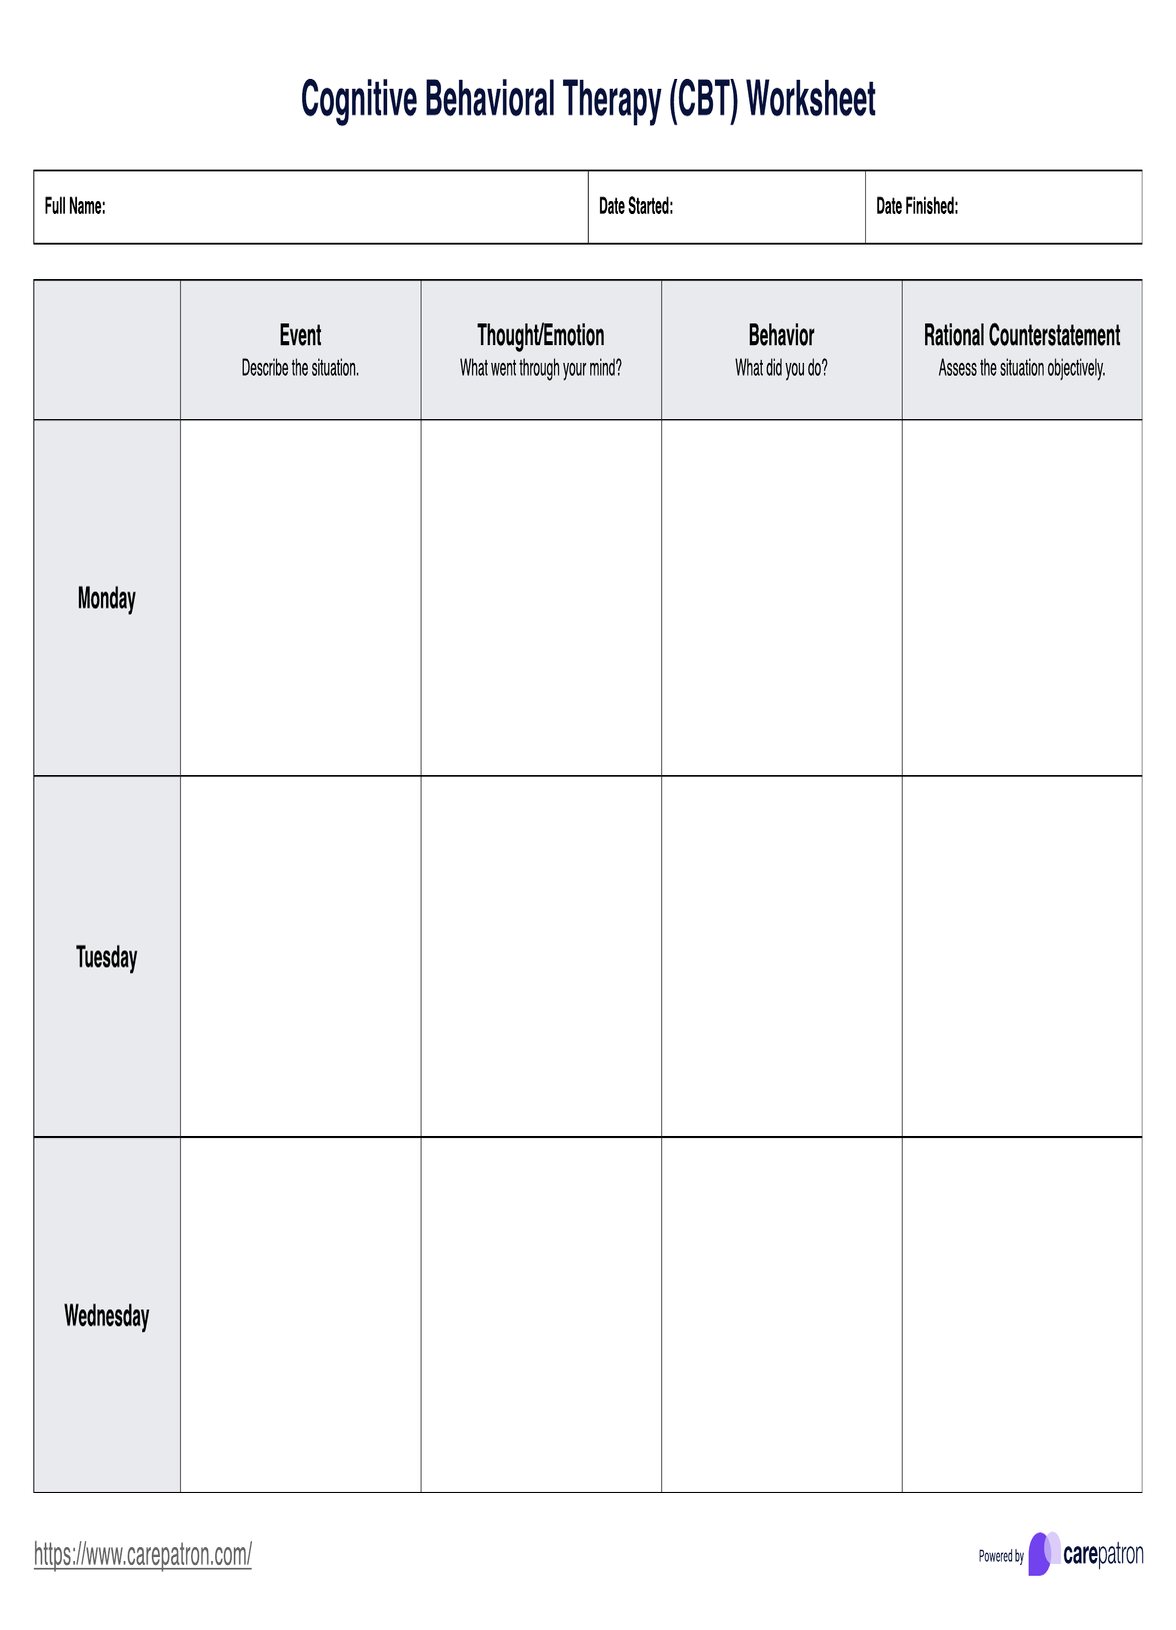 Cognitive Behavioral Therapy Worksheet Template PDF Example